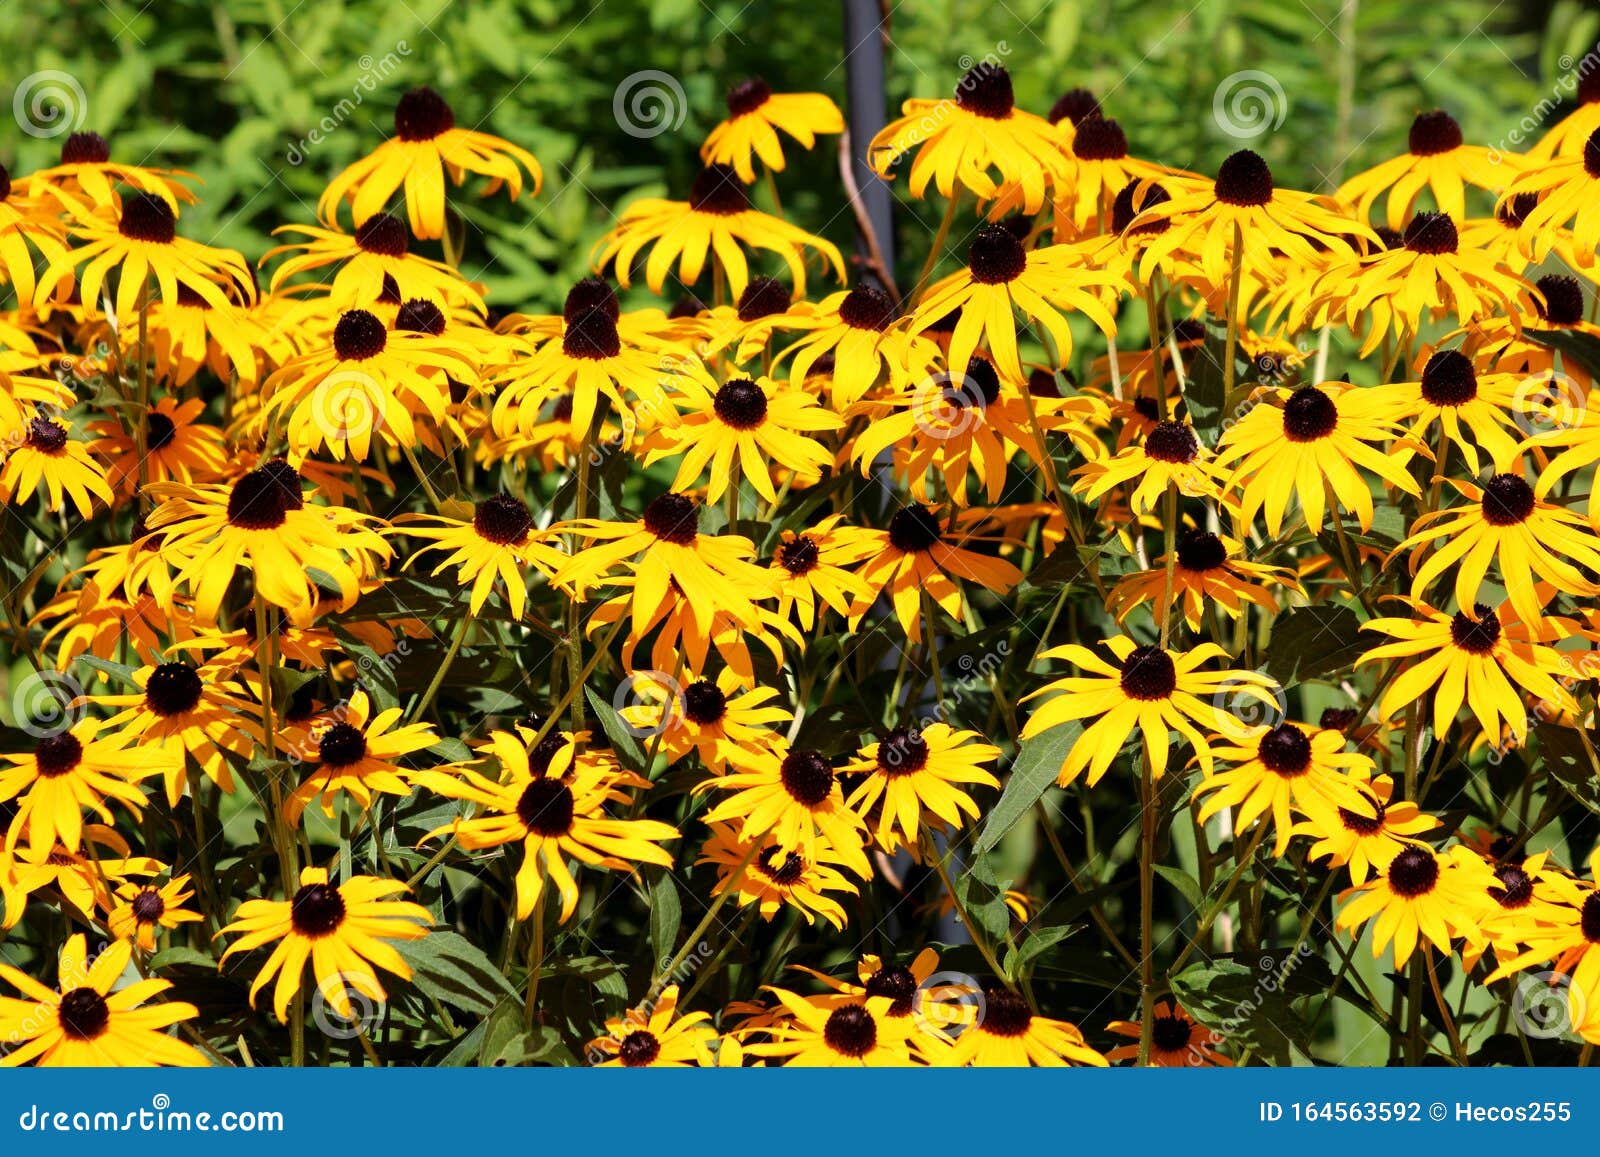 2 352 Black Eyed Susan Flowers Photos Free Royalty Free Stock Photos From Dreamstime